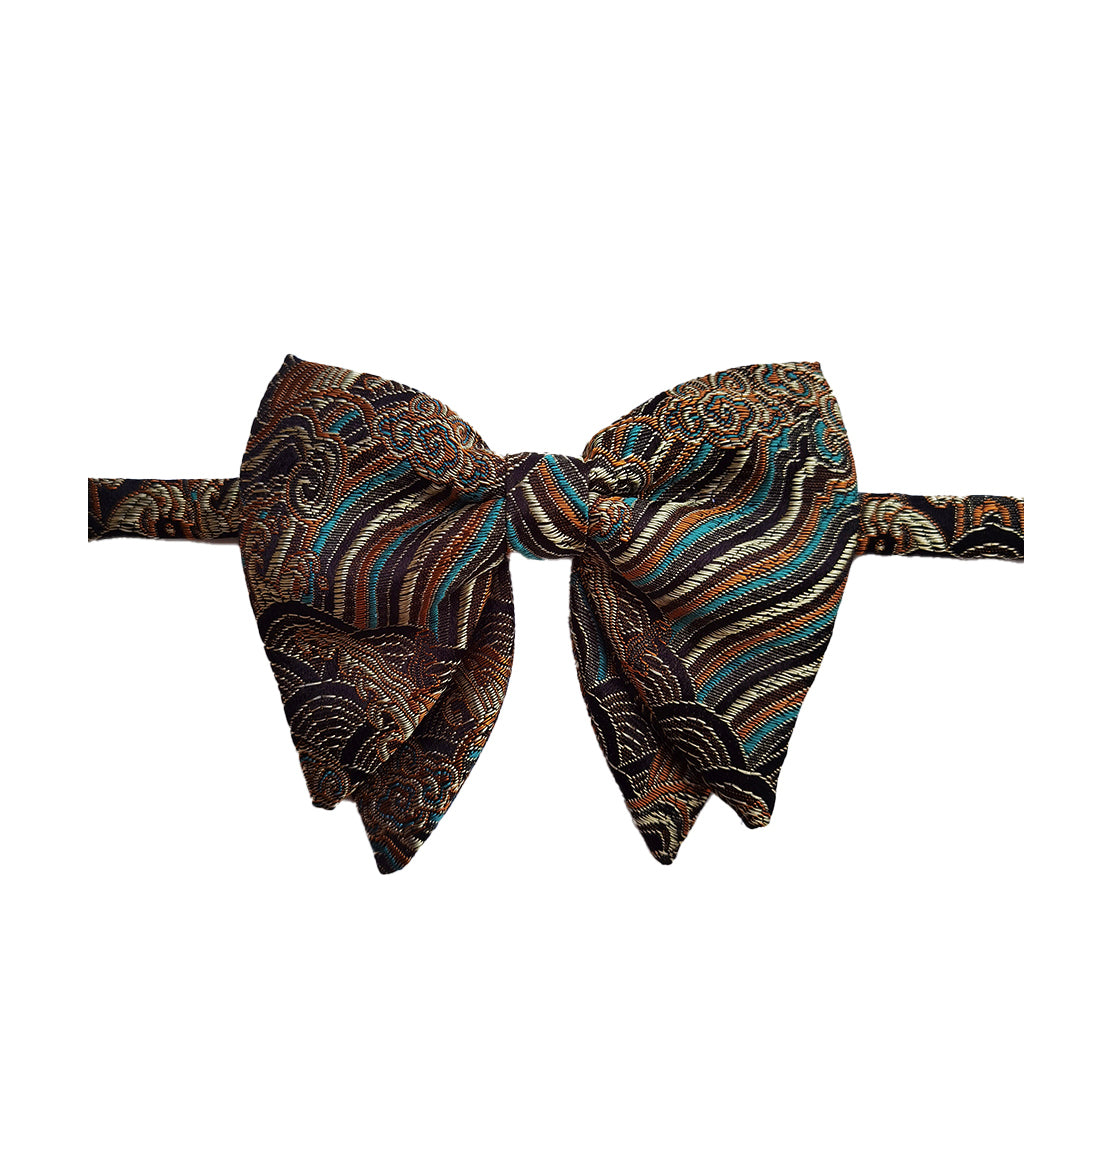 THE NAMI BT BOWTIE (BUTTERFLY)